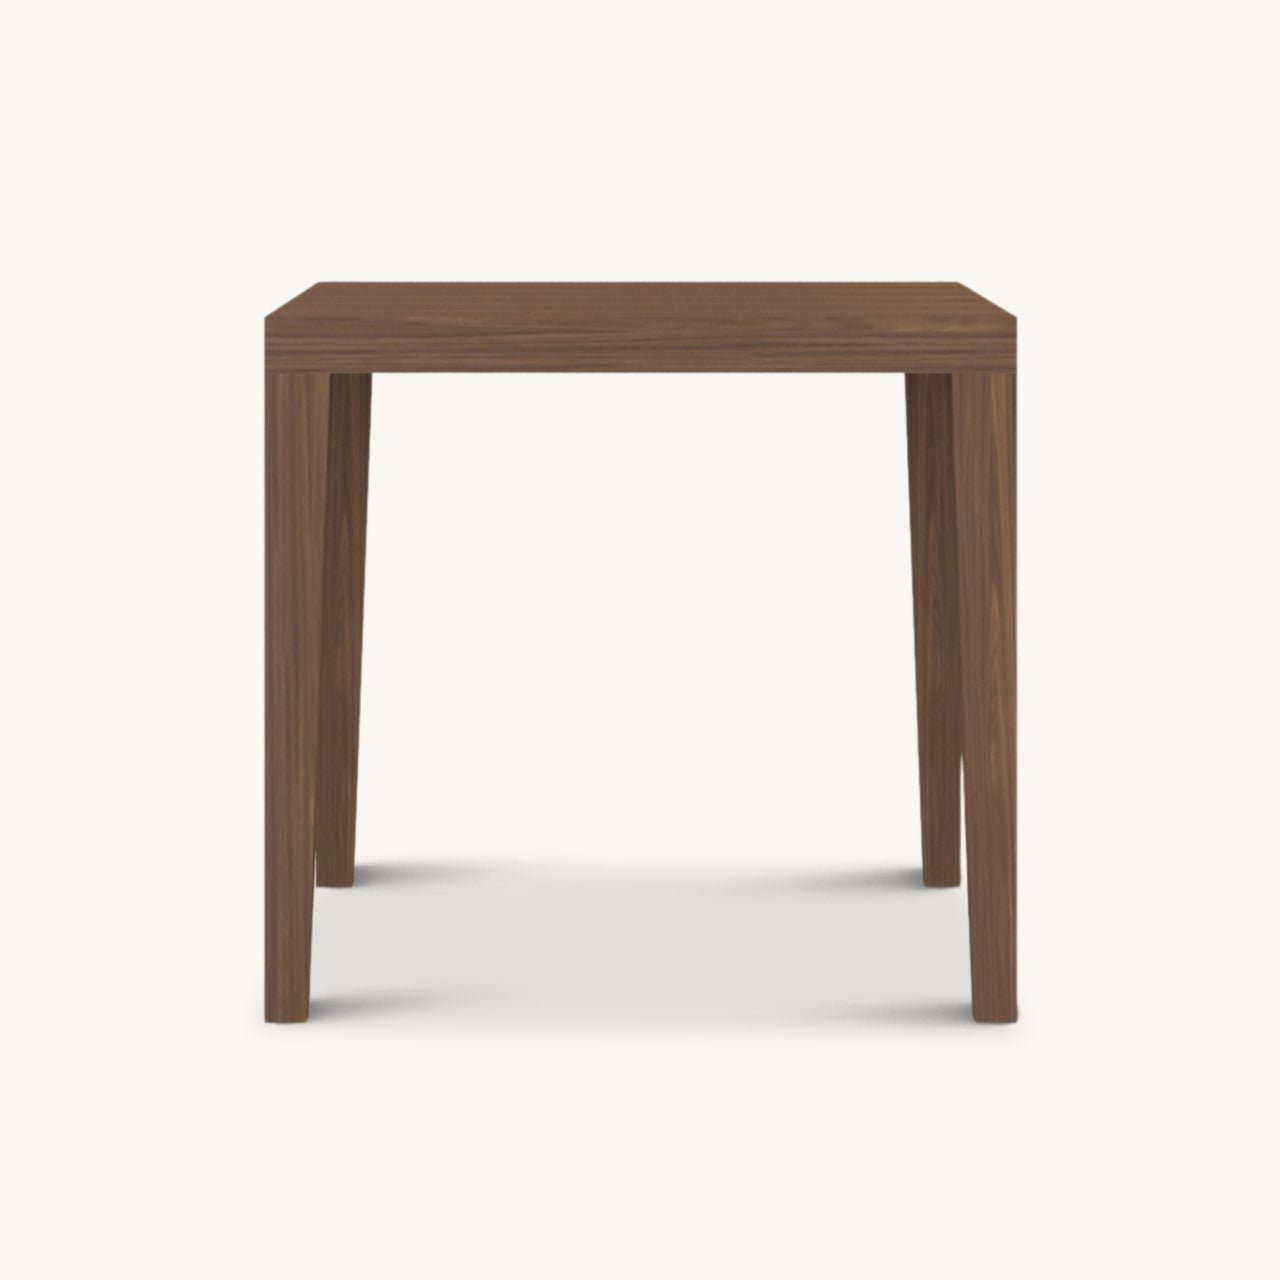 Simple square wooden dining table